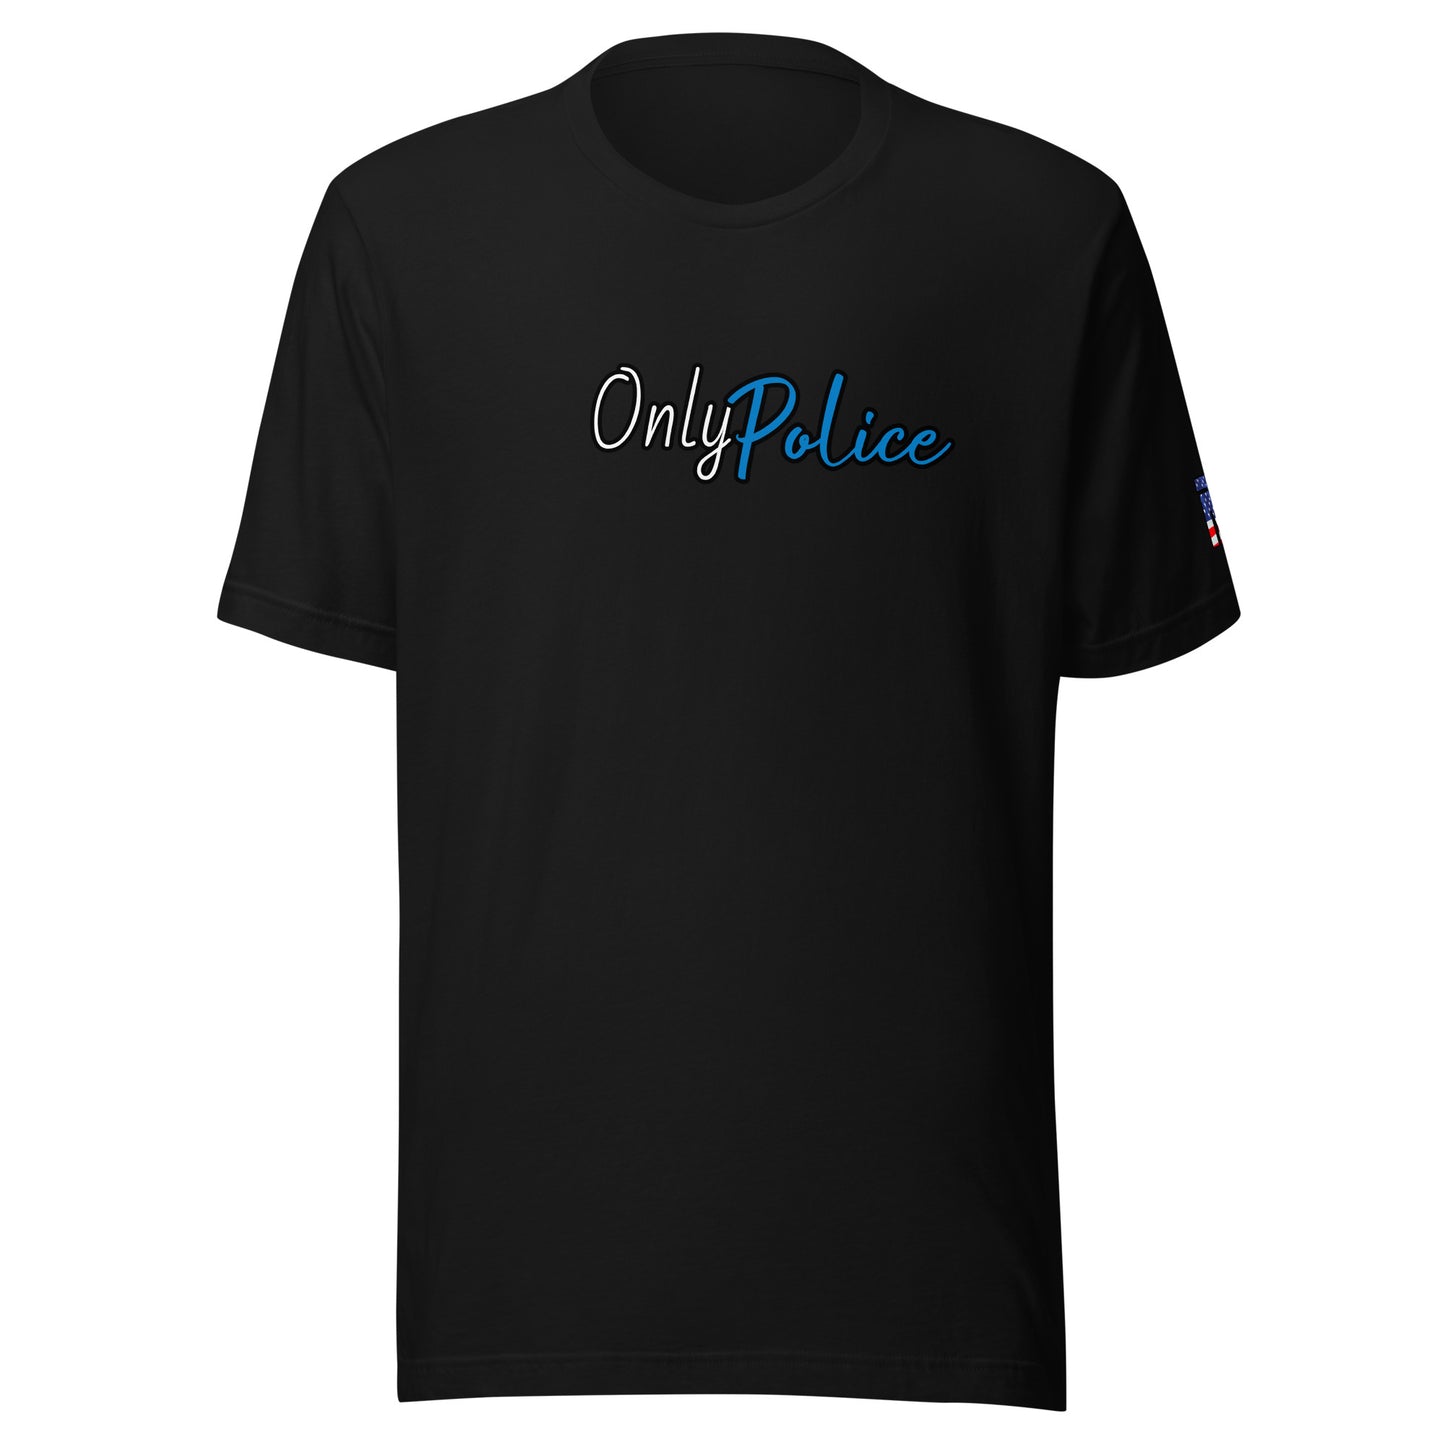 Only Police